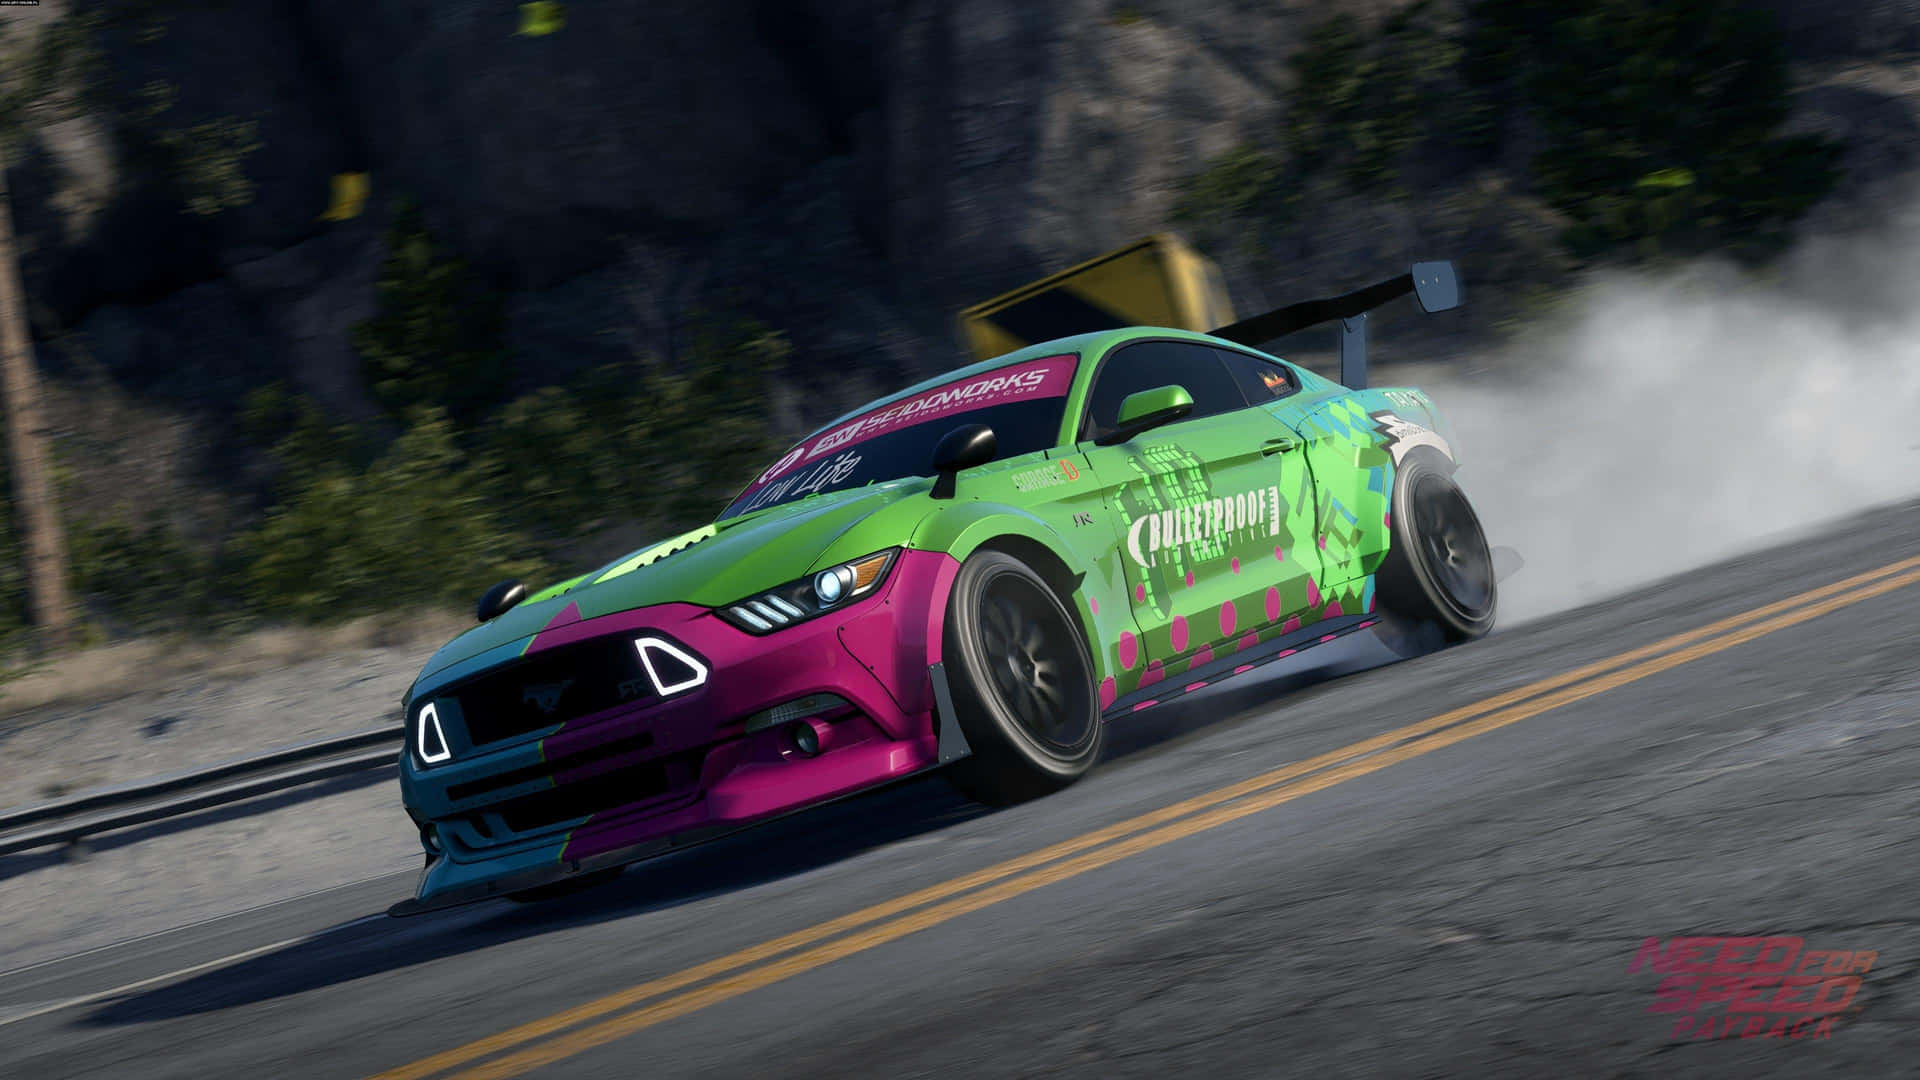 A Green And Pink Mustang Racing Car On A Track Wallpaper